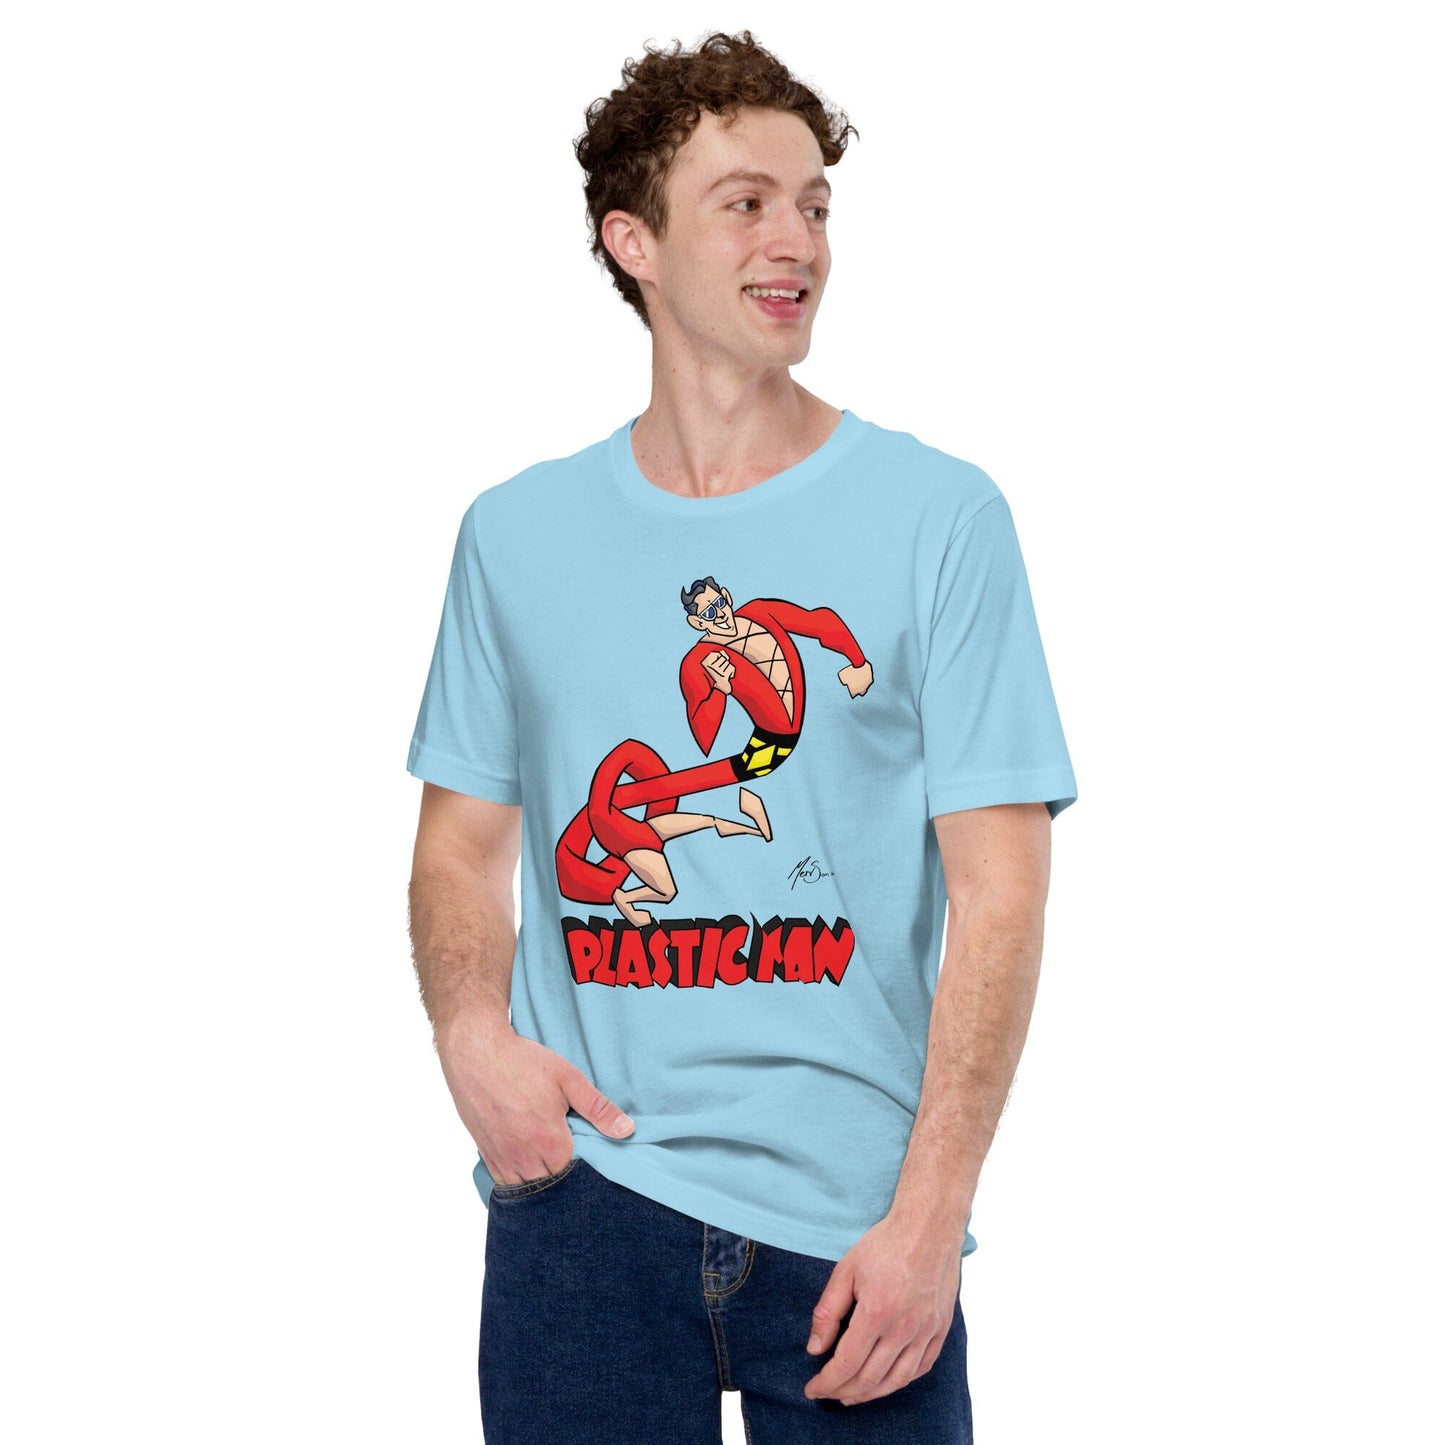 Plastic Man T-Shirt: Stretch Your Style in Comfort! Mervson Ocean Blue S 